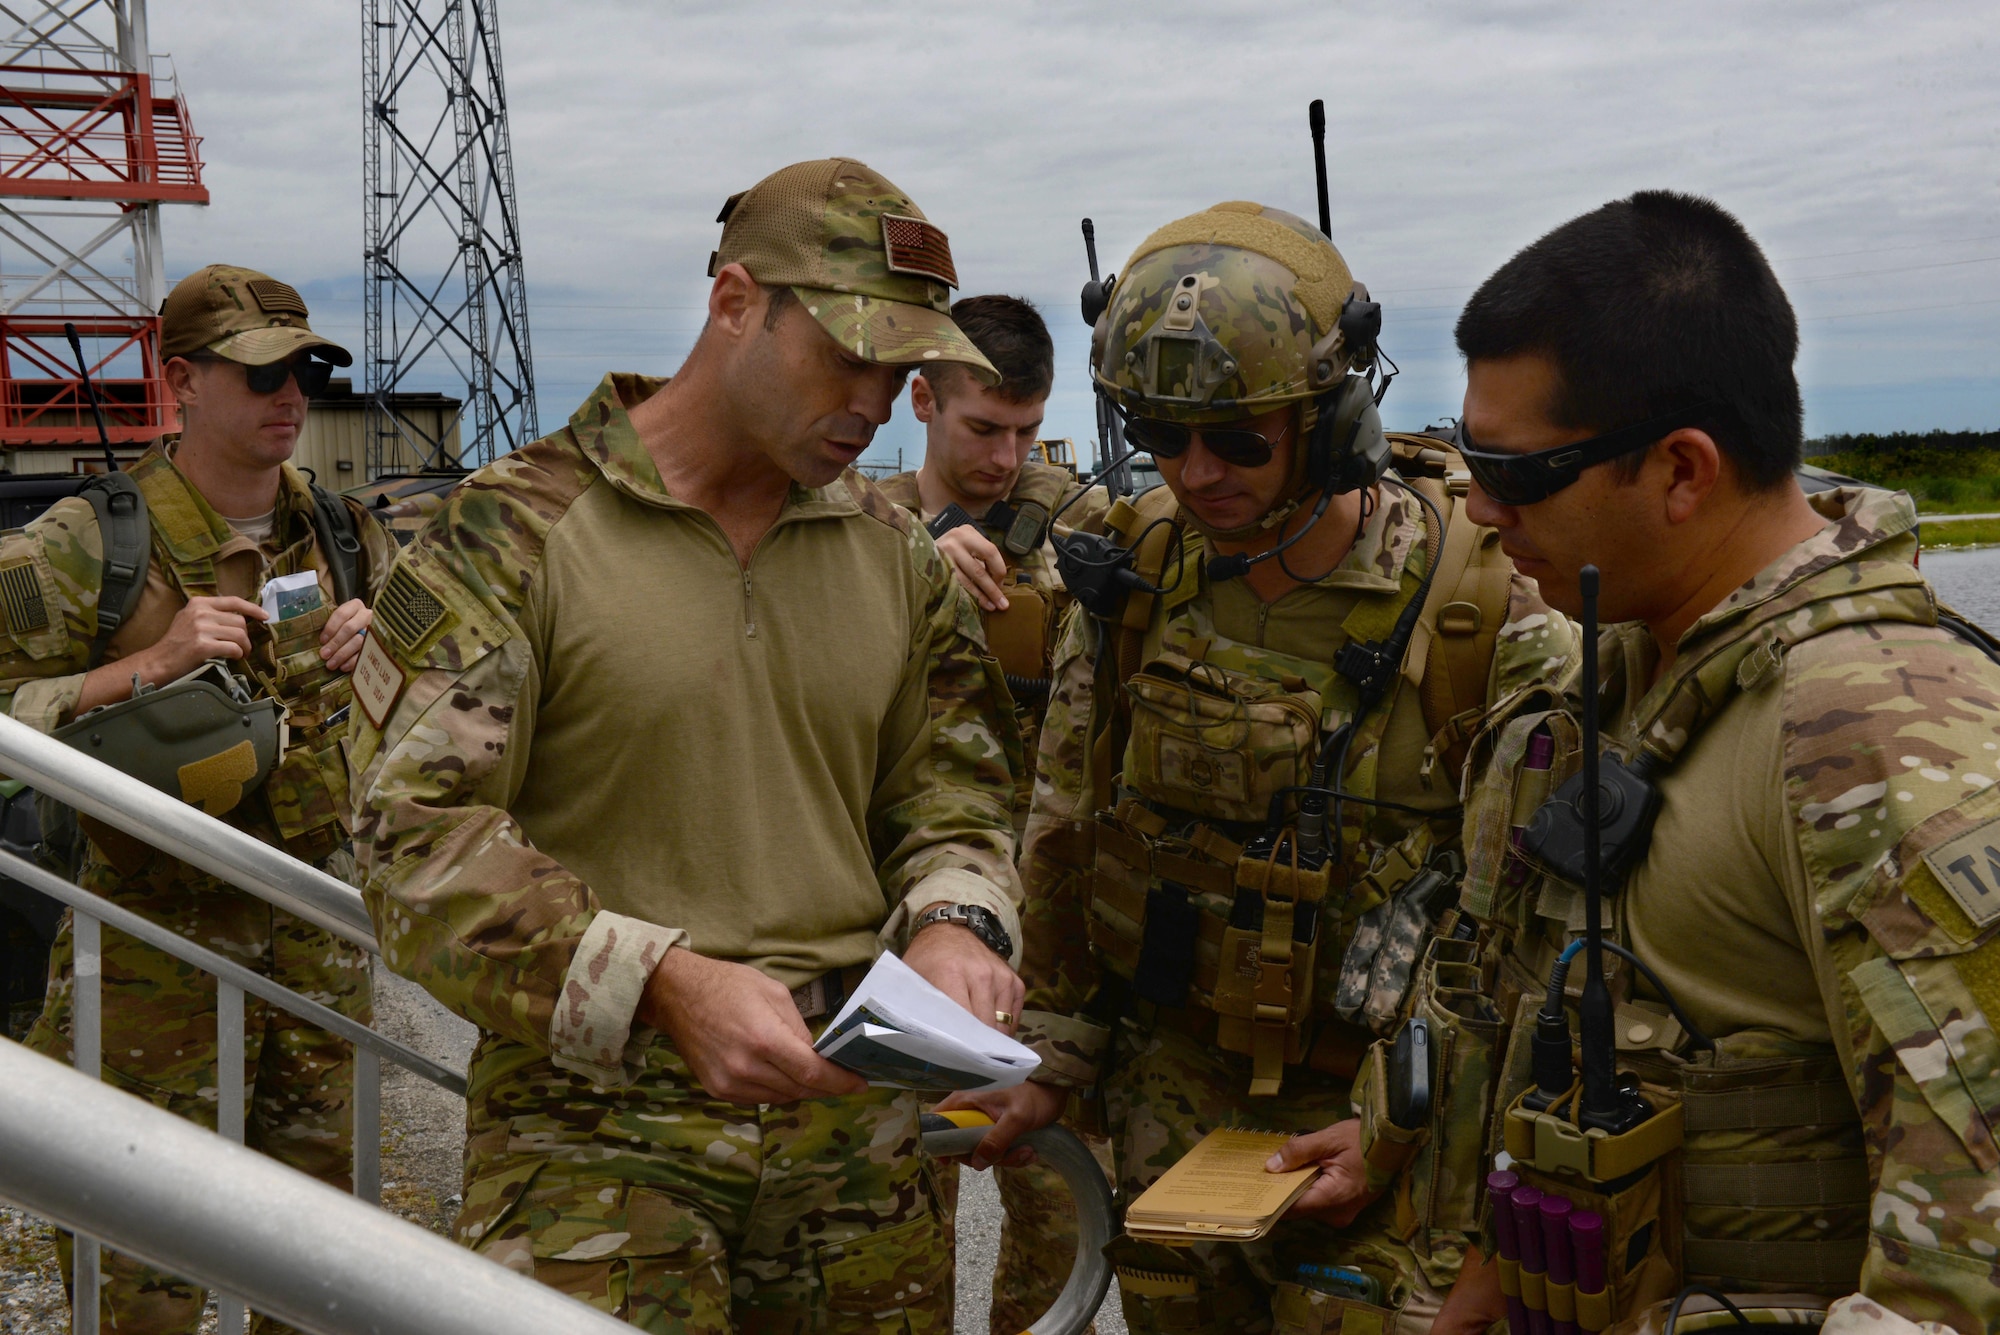 Lt. Col. James Ladd (second from left), 25th Air Support Operations Squadron director of operations, debriefs a joint terminal attack controller team after exercise Razor Talon, May 20, 2016, at Dare County Bombing Range, North Carolina. ASOS relies on personal relationships with squadron or wing leadership to receive support for JTAC training requirements. (U.S. Air Force photo by Airman 1st Class Ashley Williamson/Released)